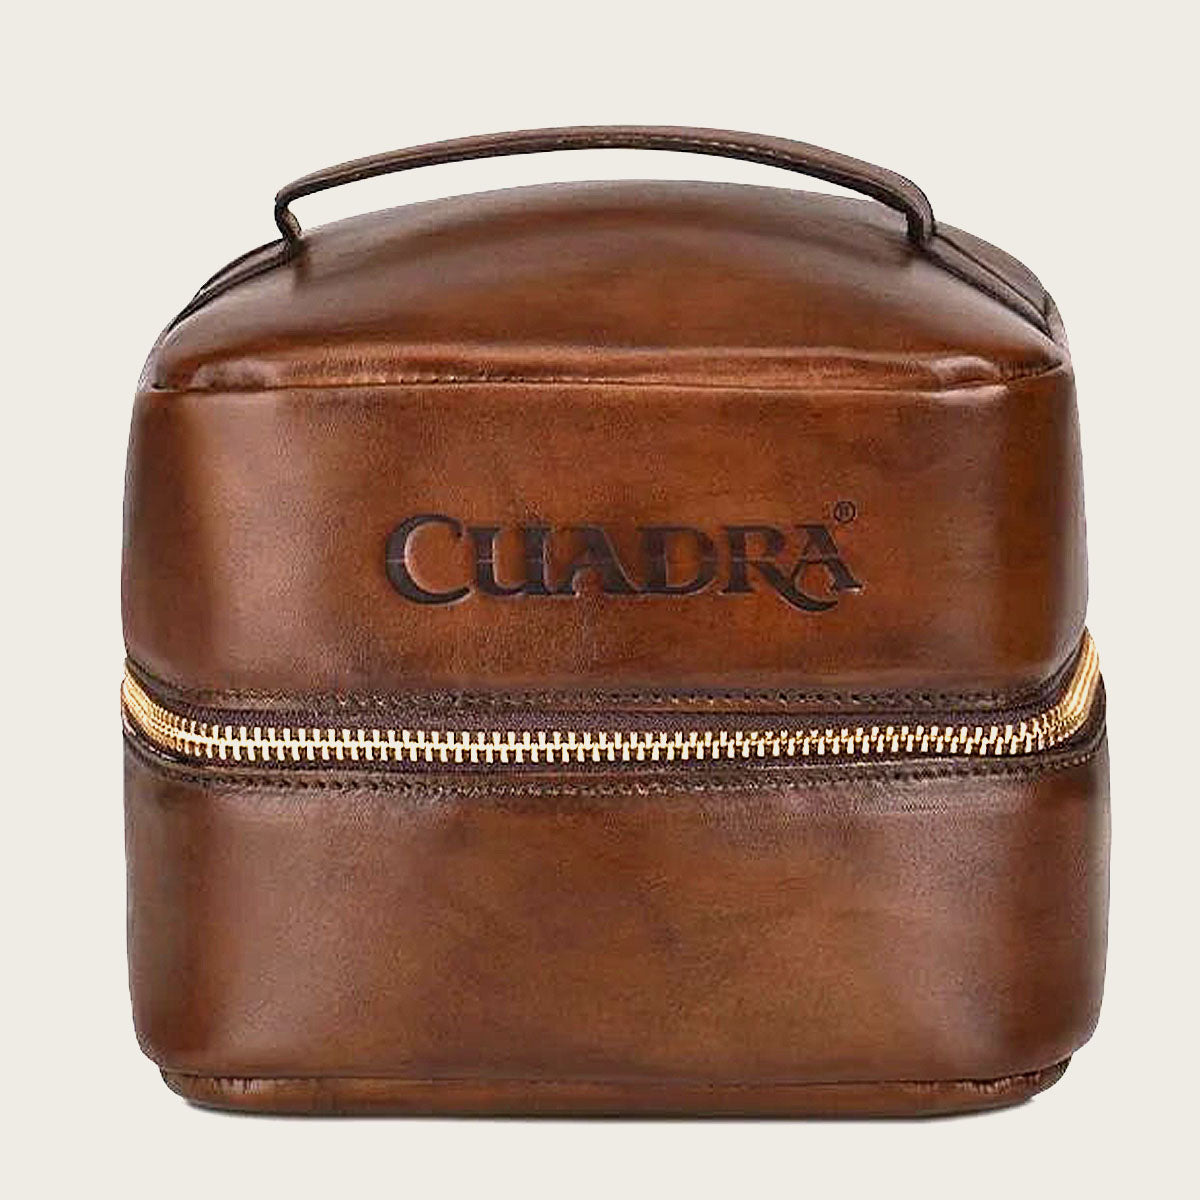 With this Cuadra Cleaning Kit and its accompanying care supplies, you can ensure your leather always looks its best.